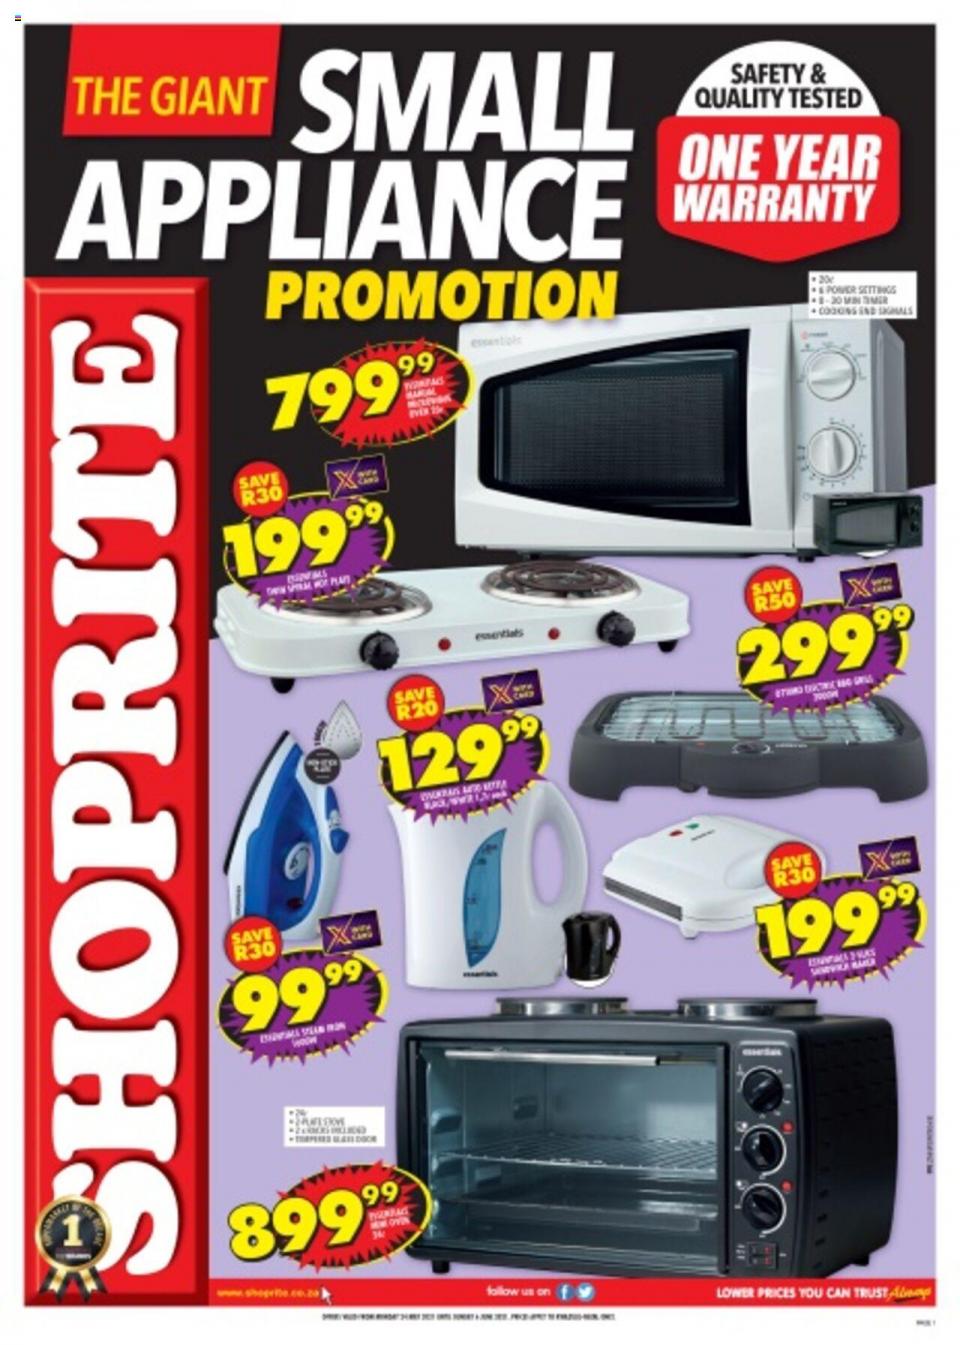 Shoprite Specials Small Appliance Promotion 24 May – 6 Jun 2021